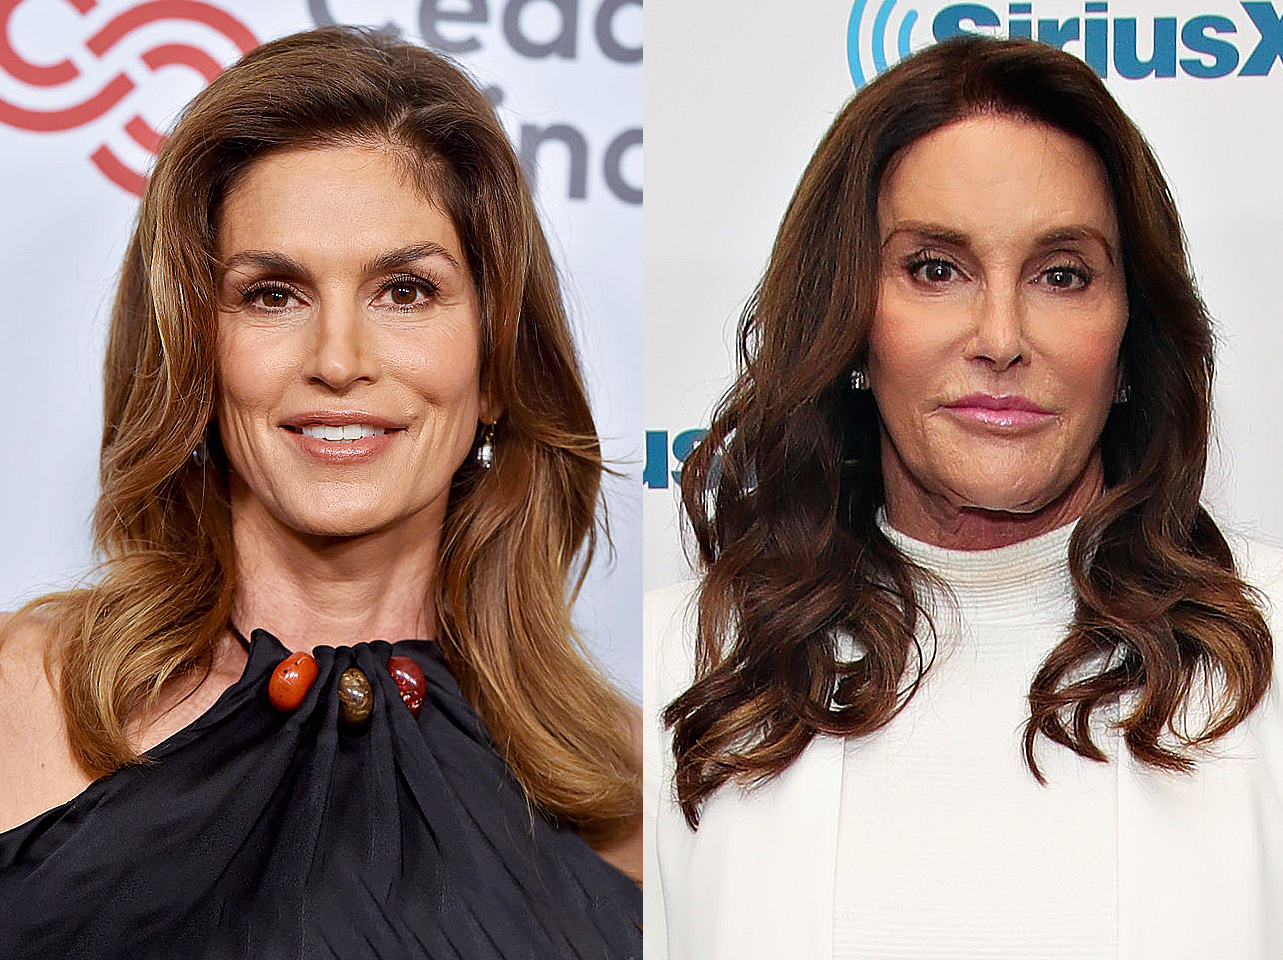 Caitlyn Jenner und Cindy Crawford | Quelle: Getty Images